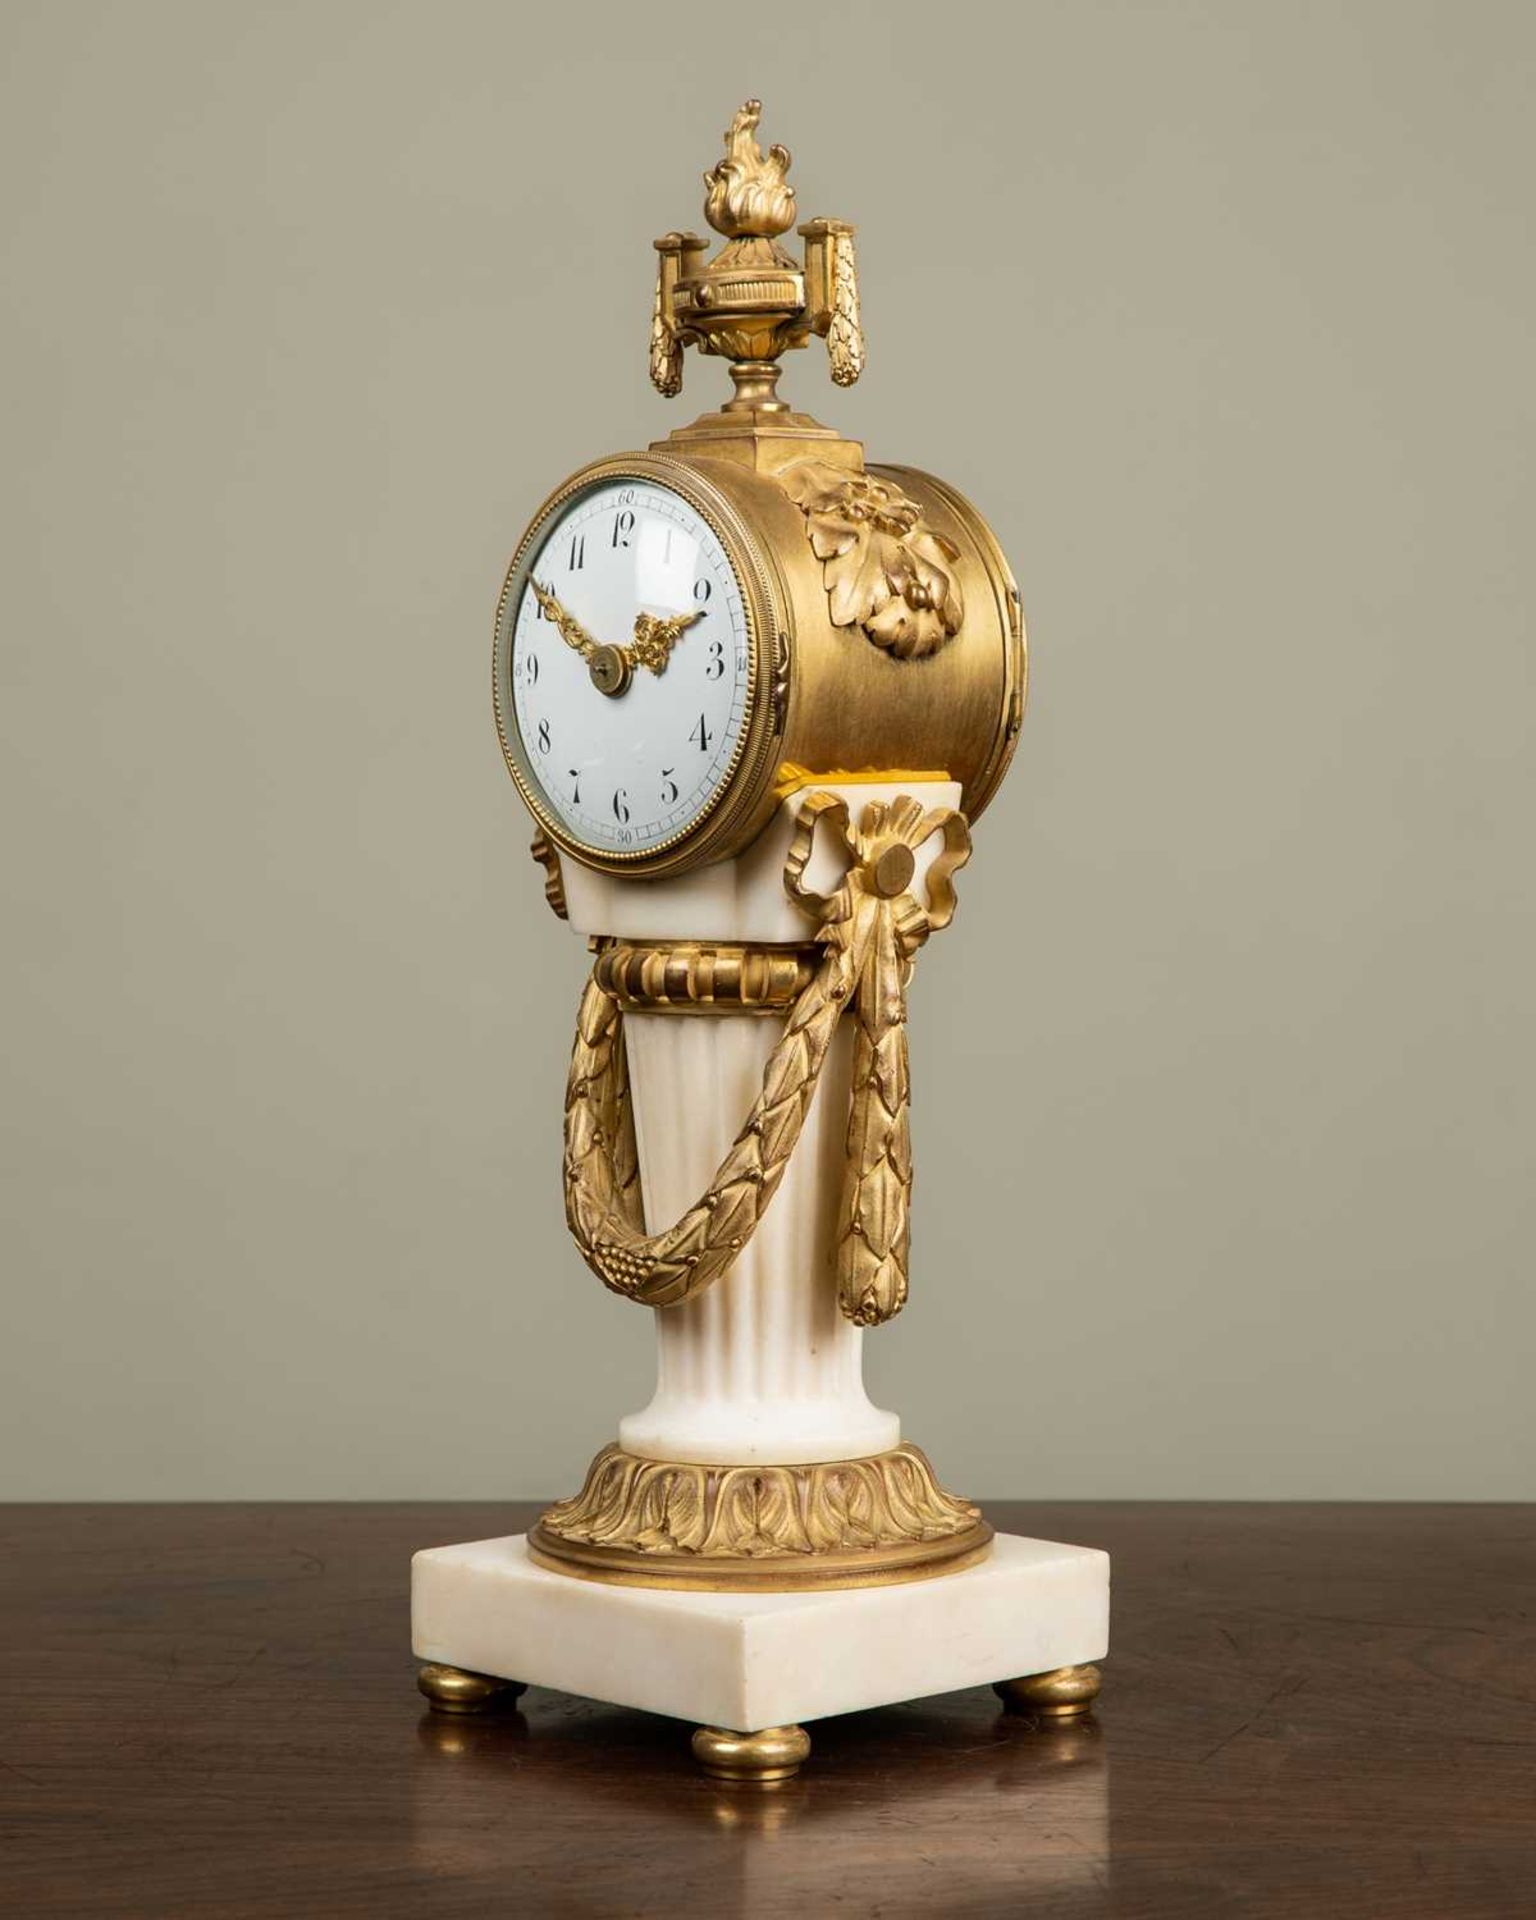 An early 20th century French ormolu and marble timepiece in the Classical style, with flaming vase - Image 2 of 4